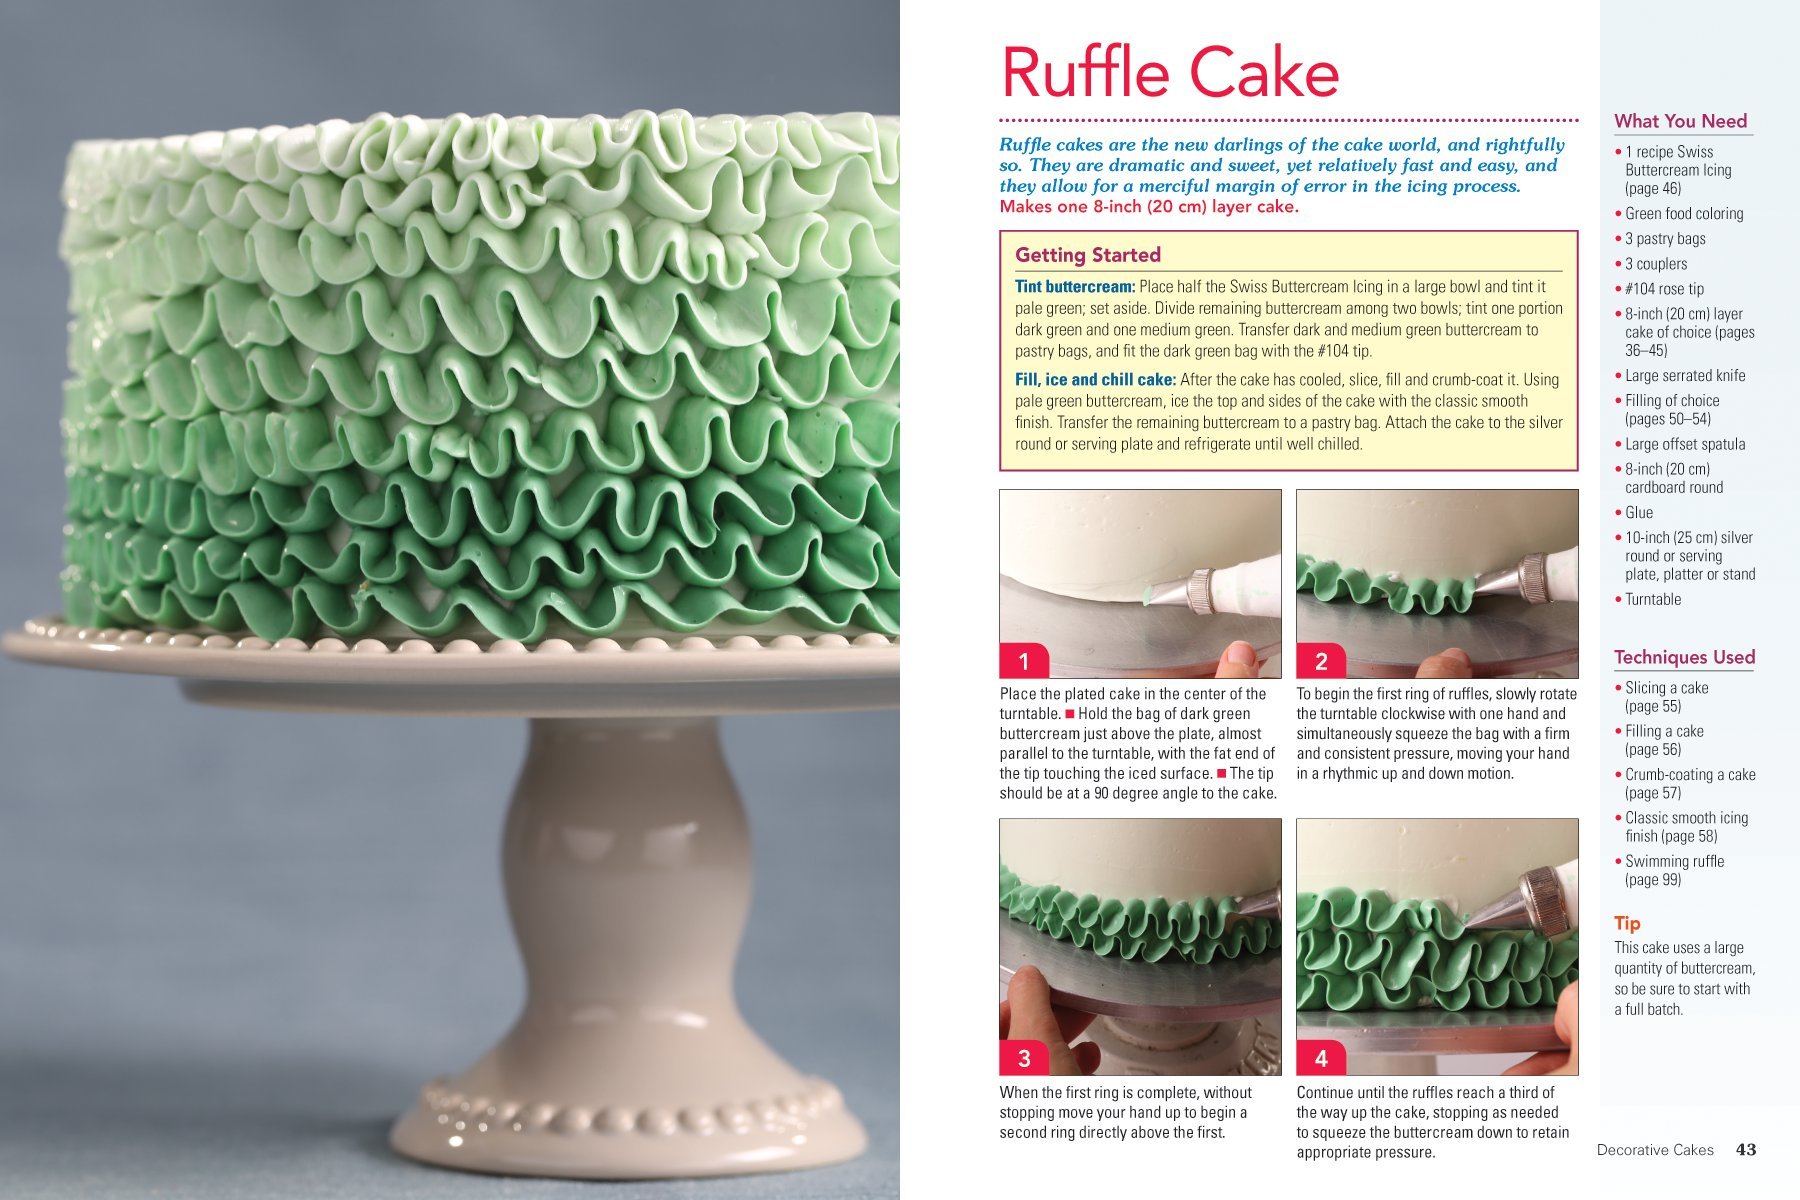 Sensational Buttercream Decorating: 50 Projects for Luscious Cakes, Mini-Cakes and Cupcakes